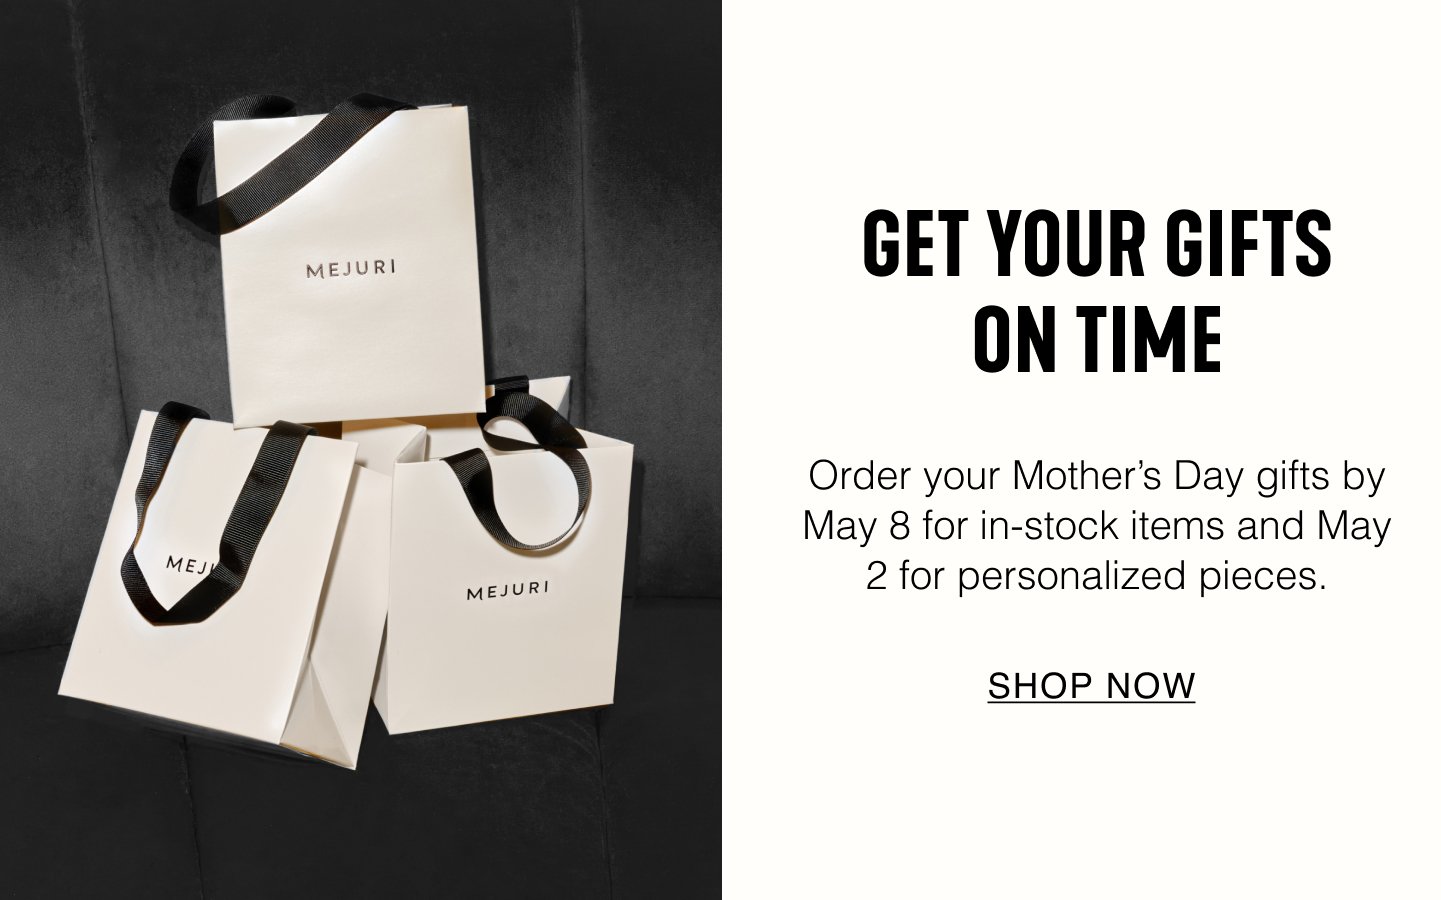 Get Your Gifts On Time. Order your Mother's Day gifts by May 8 for in-stock items and May 2 for personalized pieces. Shop Now.